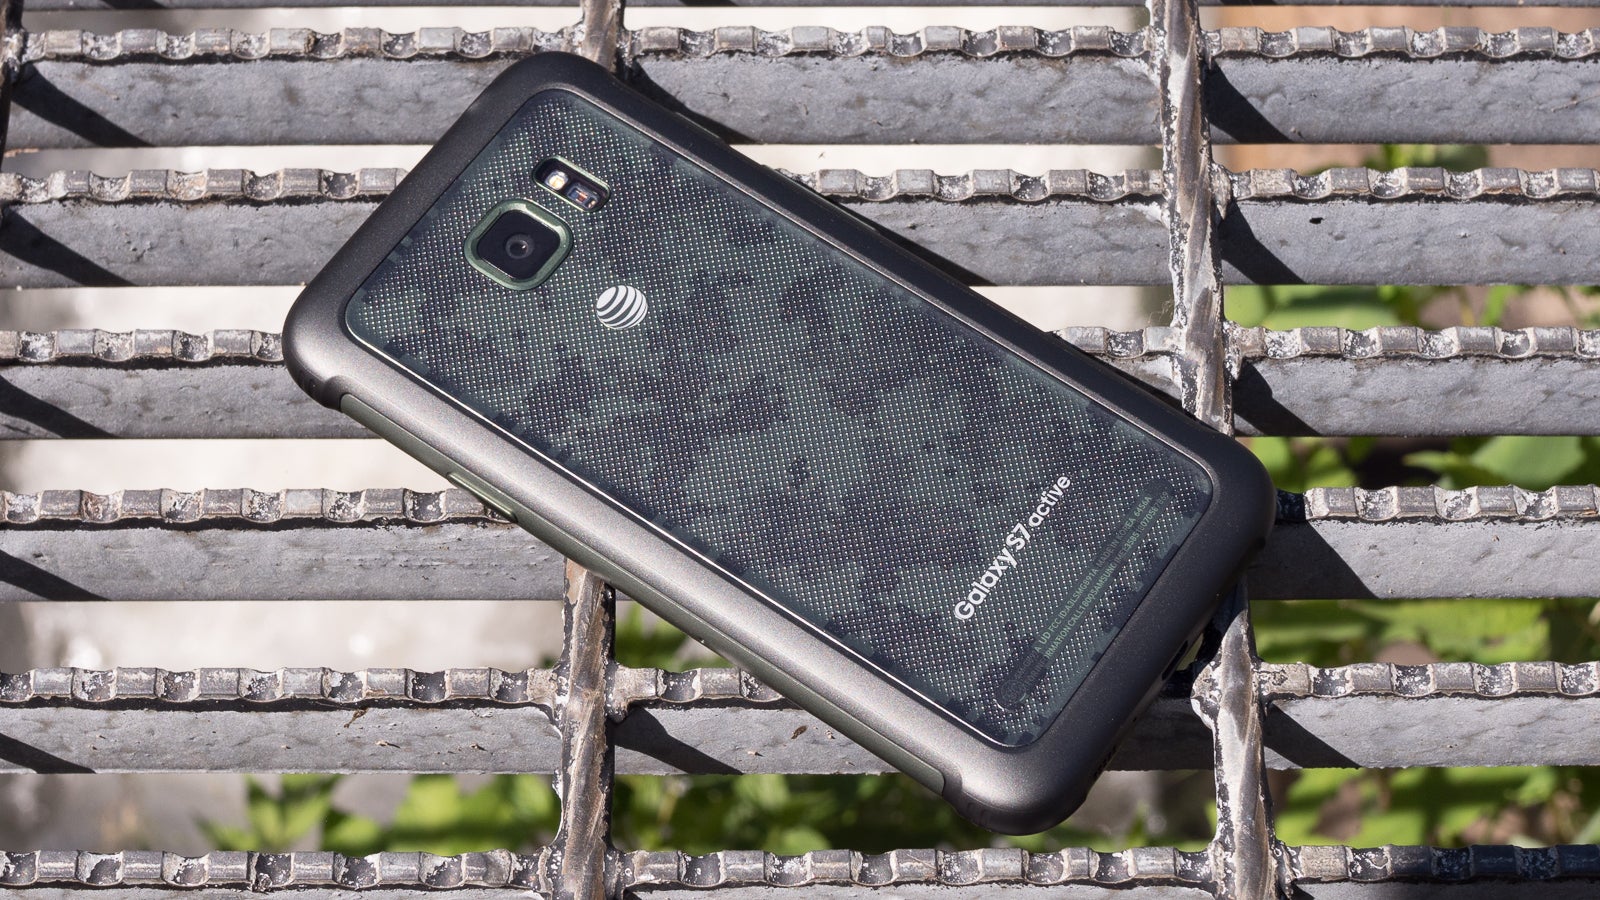 Samsung Galaxy S7 Active - Galaxy S8 Active rumor review: differences vs Galaxy S8, specs and release date